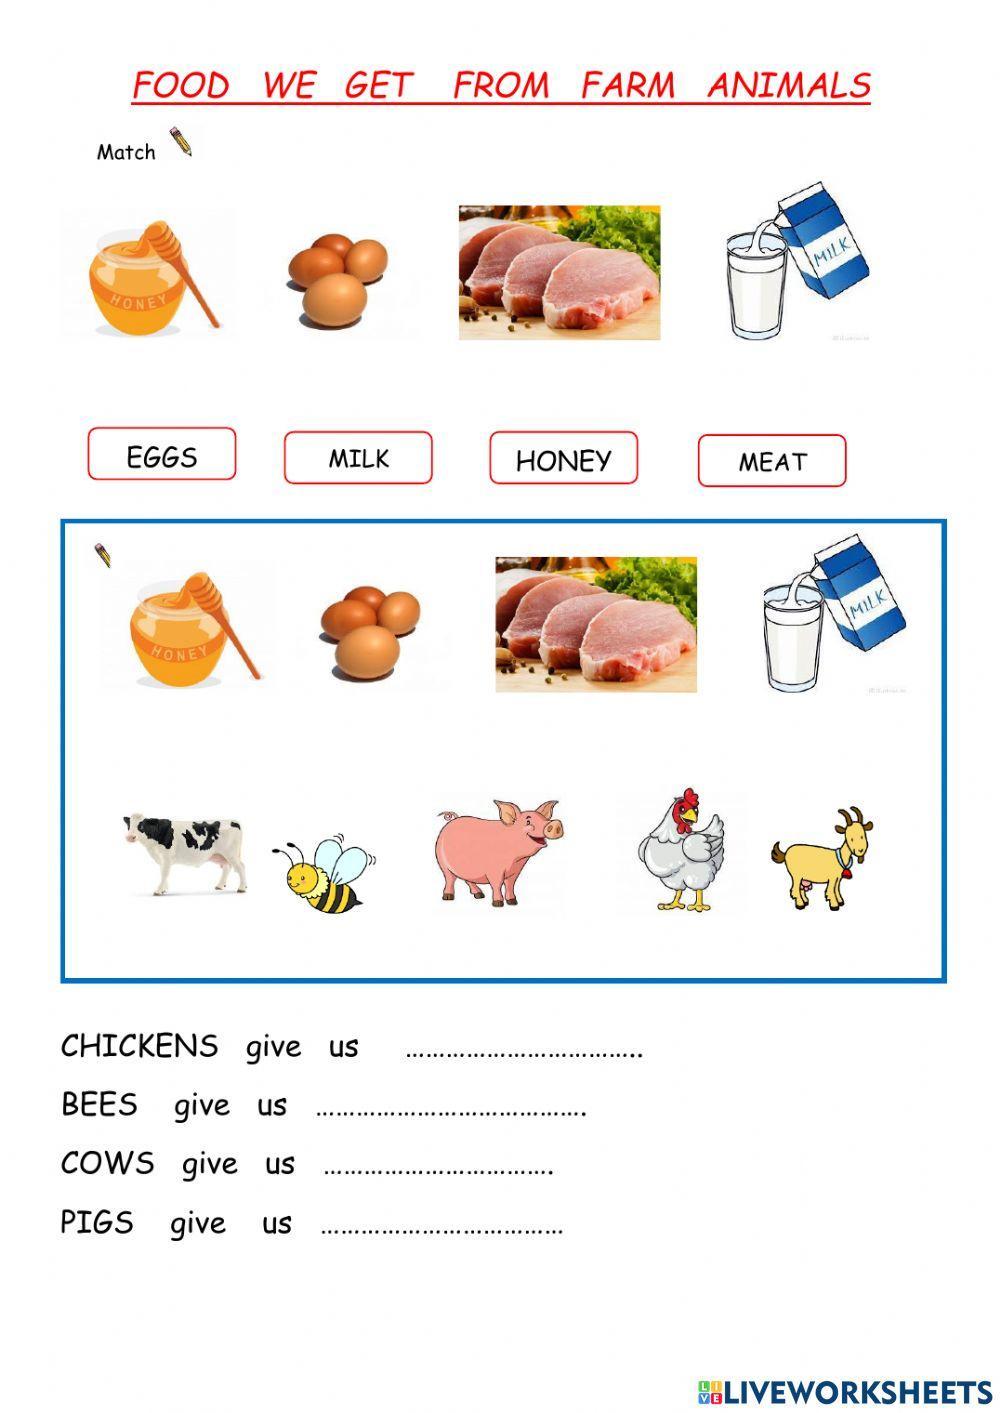 Food we get from farm animals